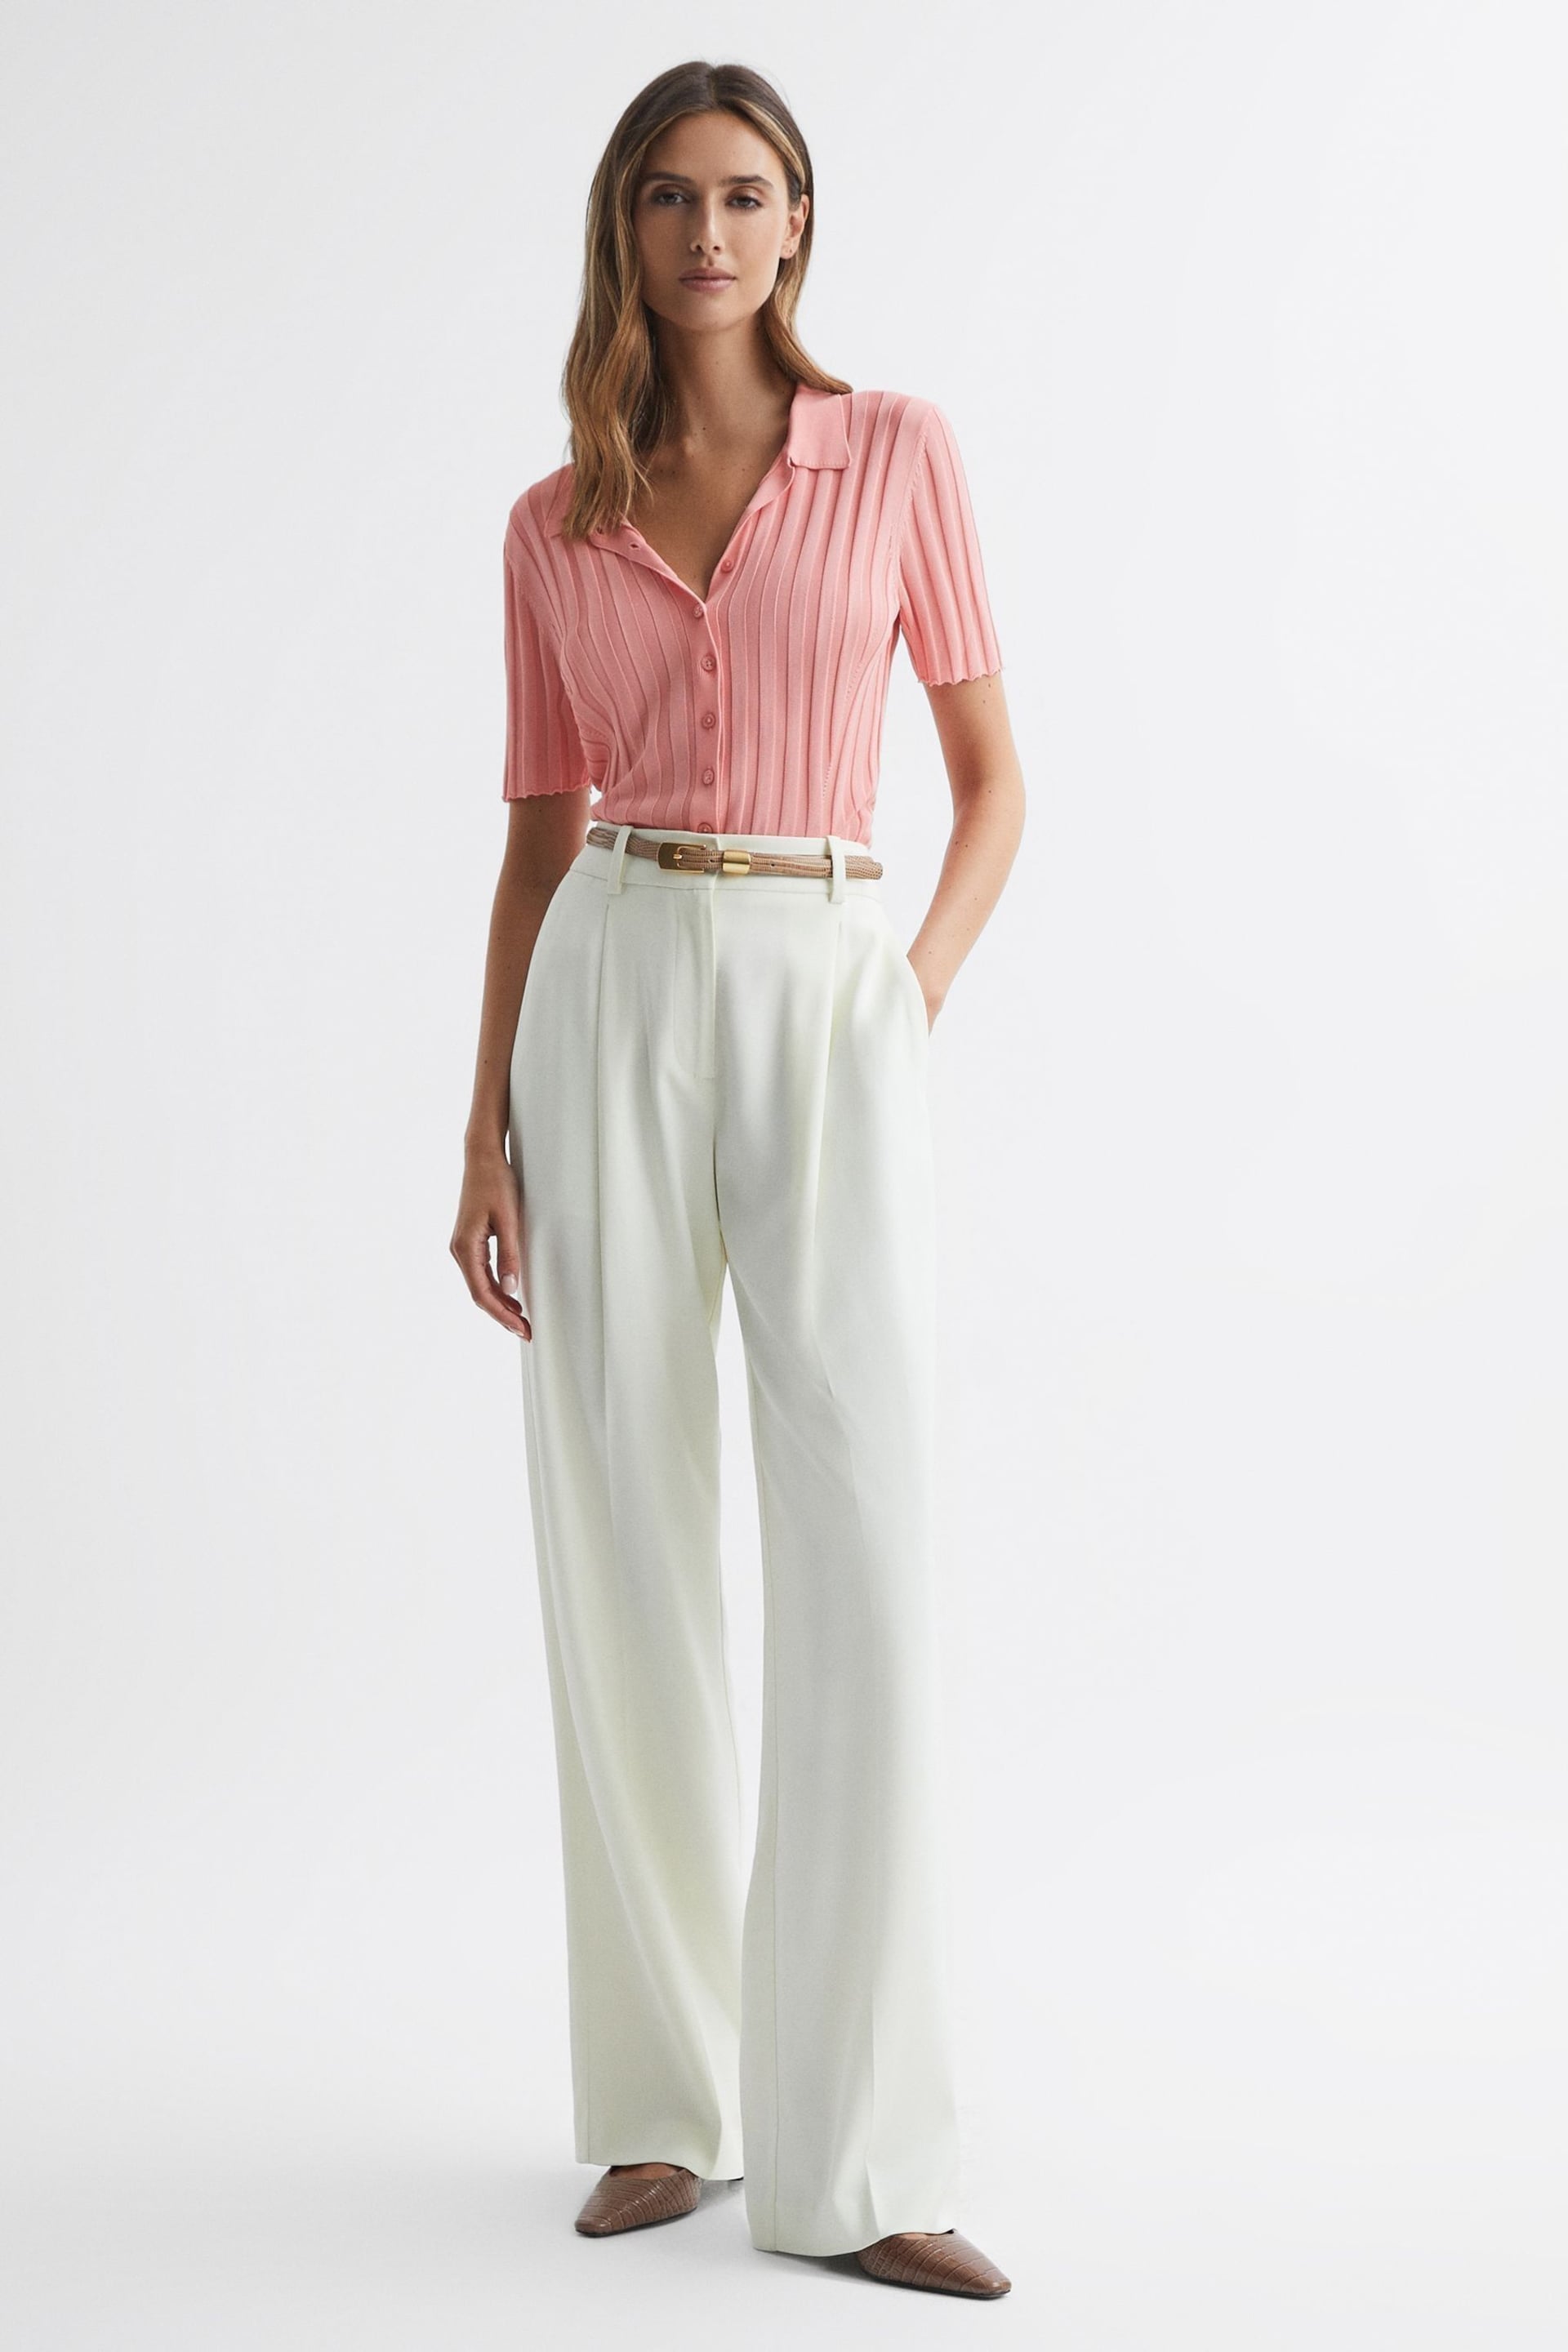 Reiss Pink Stella Fitted Striped Button Through T-Shirt - Image 1 of 5